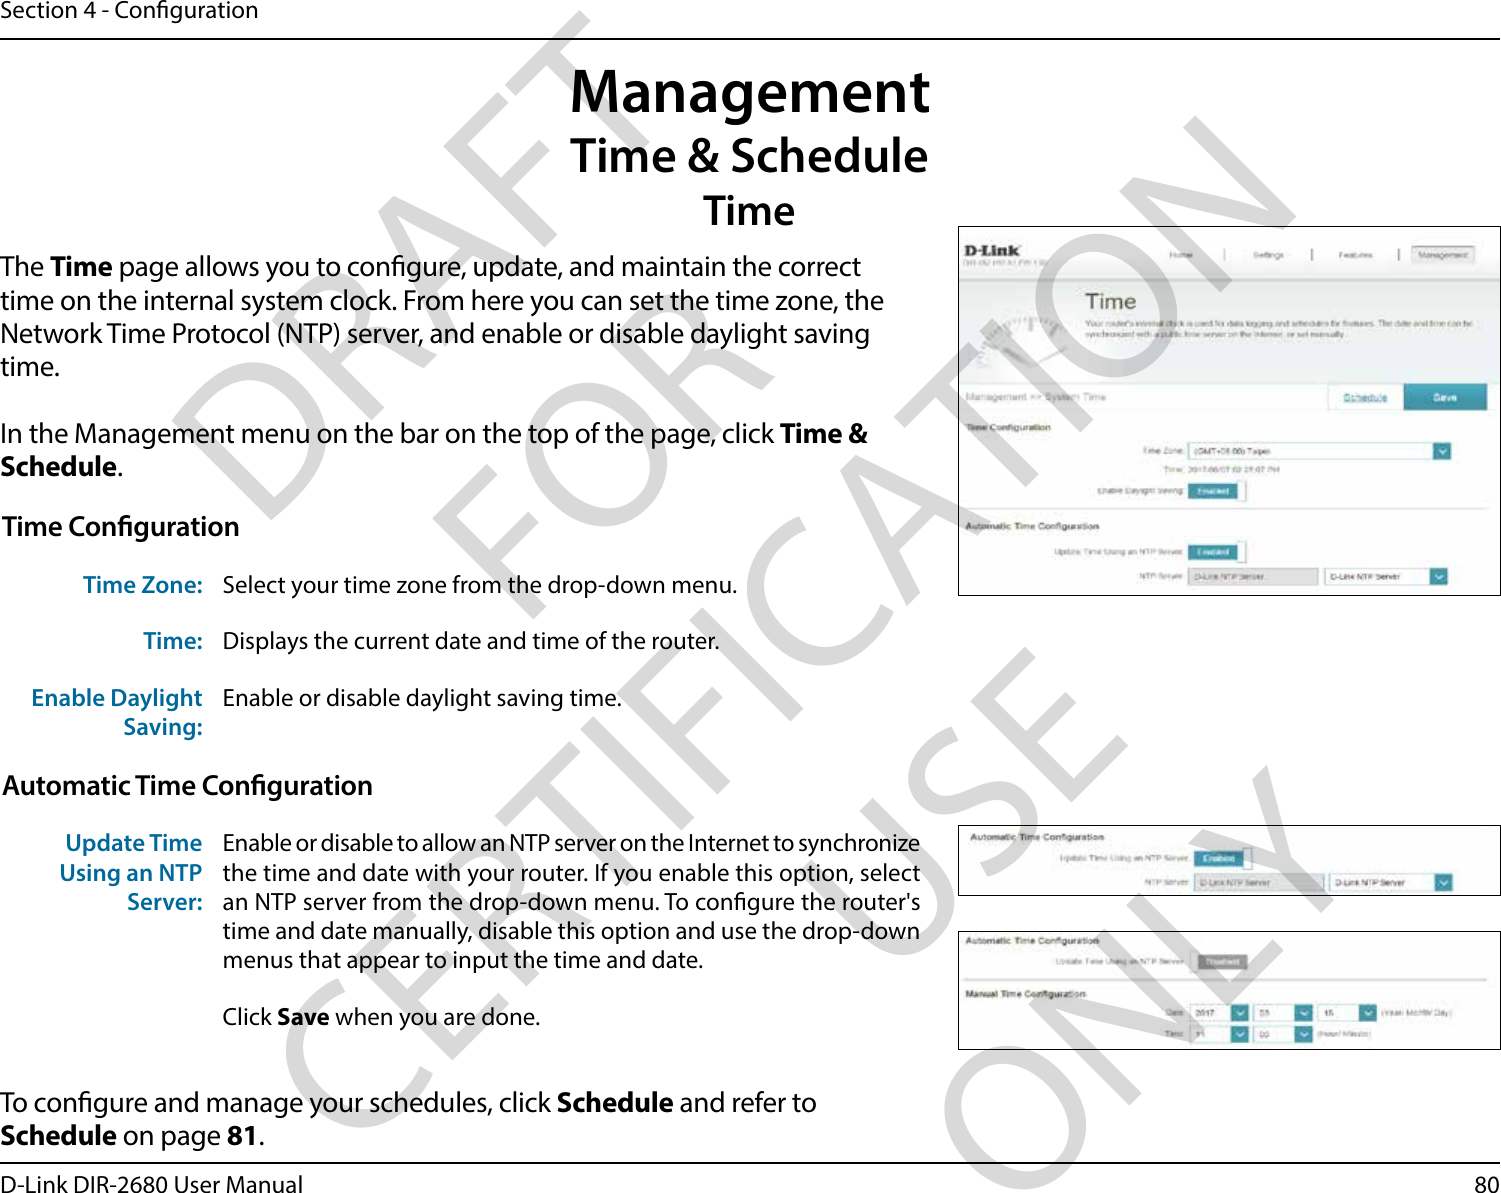 80D-Link DIR-2680 User ManualSection 4 - CongurationManagementTime &amp; ScheduleTimeThe Time page allows you to congure, update, and maintain the correct time on the internal system clock. From here you can set the time zone, the Network Time Protocol (NTP) server, and enable or disable daylight saving time.In the Management menu on the bar on the top of the page, click Time &amp; Schedule.To congure and manage your schedules, click Schedule and refer to Schedule on page 81.Time CongurationTime Zone: Select your time zone from the drop-down menu.Time: Displays the current date and time of the router.Enable Daylight Saving:Enable or disable daylight saving time.Automatic Time CongurationUpdate Time Using an NTP Server:Enable or disable to allow an NTP server on the Internet to synchronize the time and date with your router. If you enable this option, select an NTP server from the drop-down menu. To congure the router&apos;s time and date manually, disable this option and use the drop-down menus that appear to input the time and date.Click Save when you are done.DRAFT FOR CERTIFICATION USE ONLY